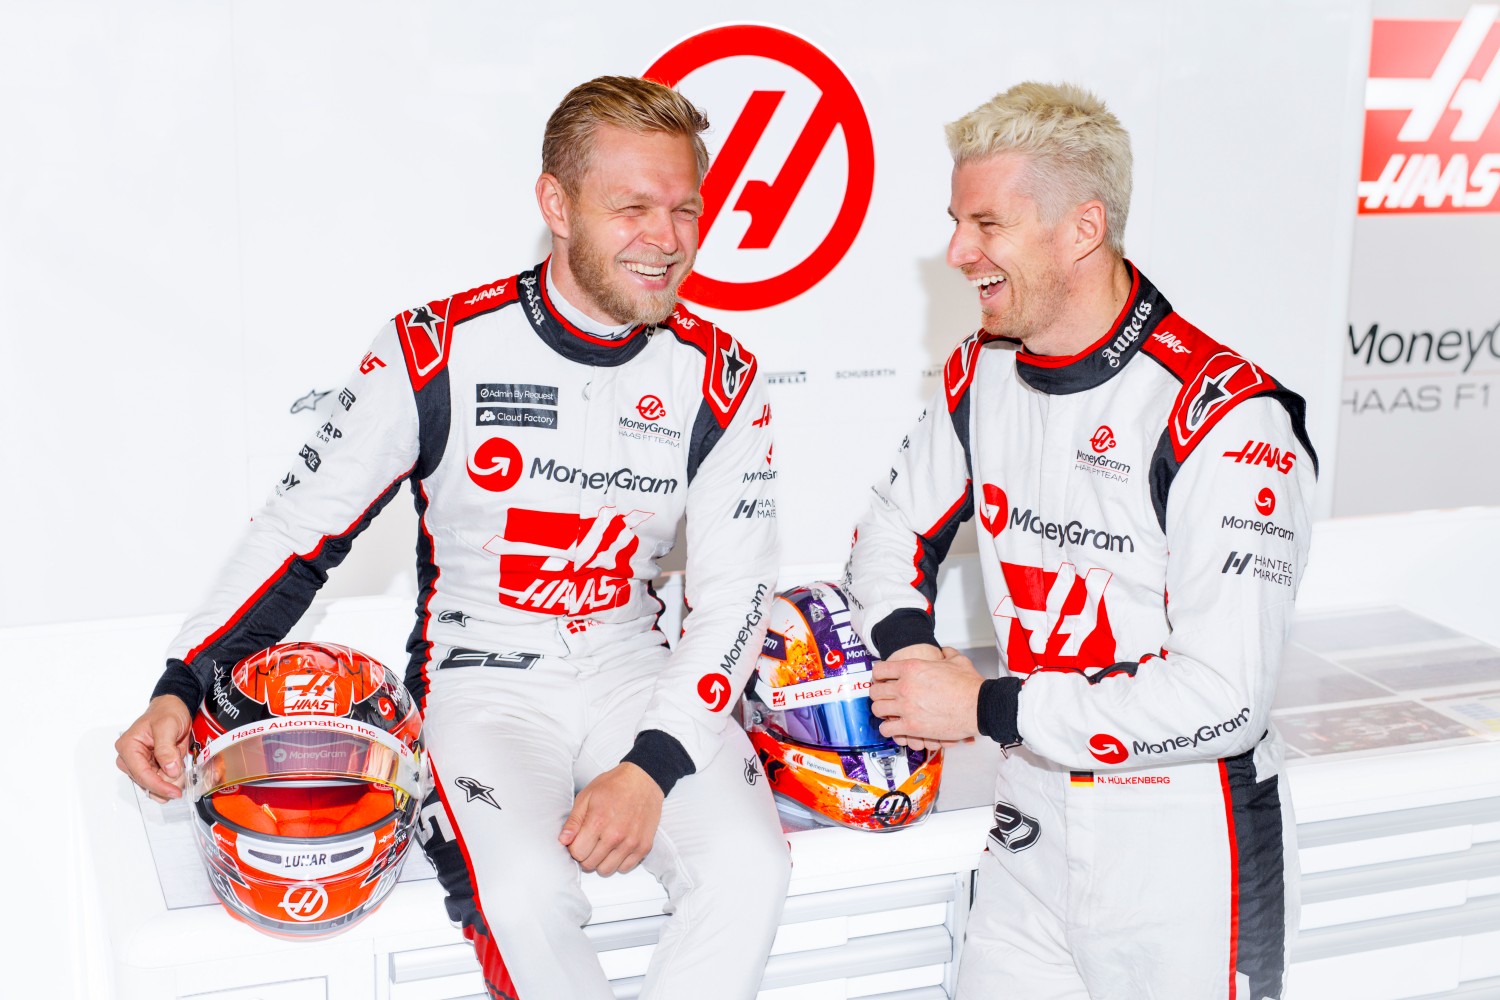 The Moneygram Haas F1 team has re-signed Kevin Magnussen (L) and Nico Hulkenberg (R)